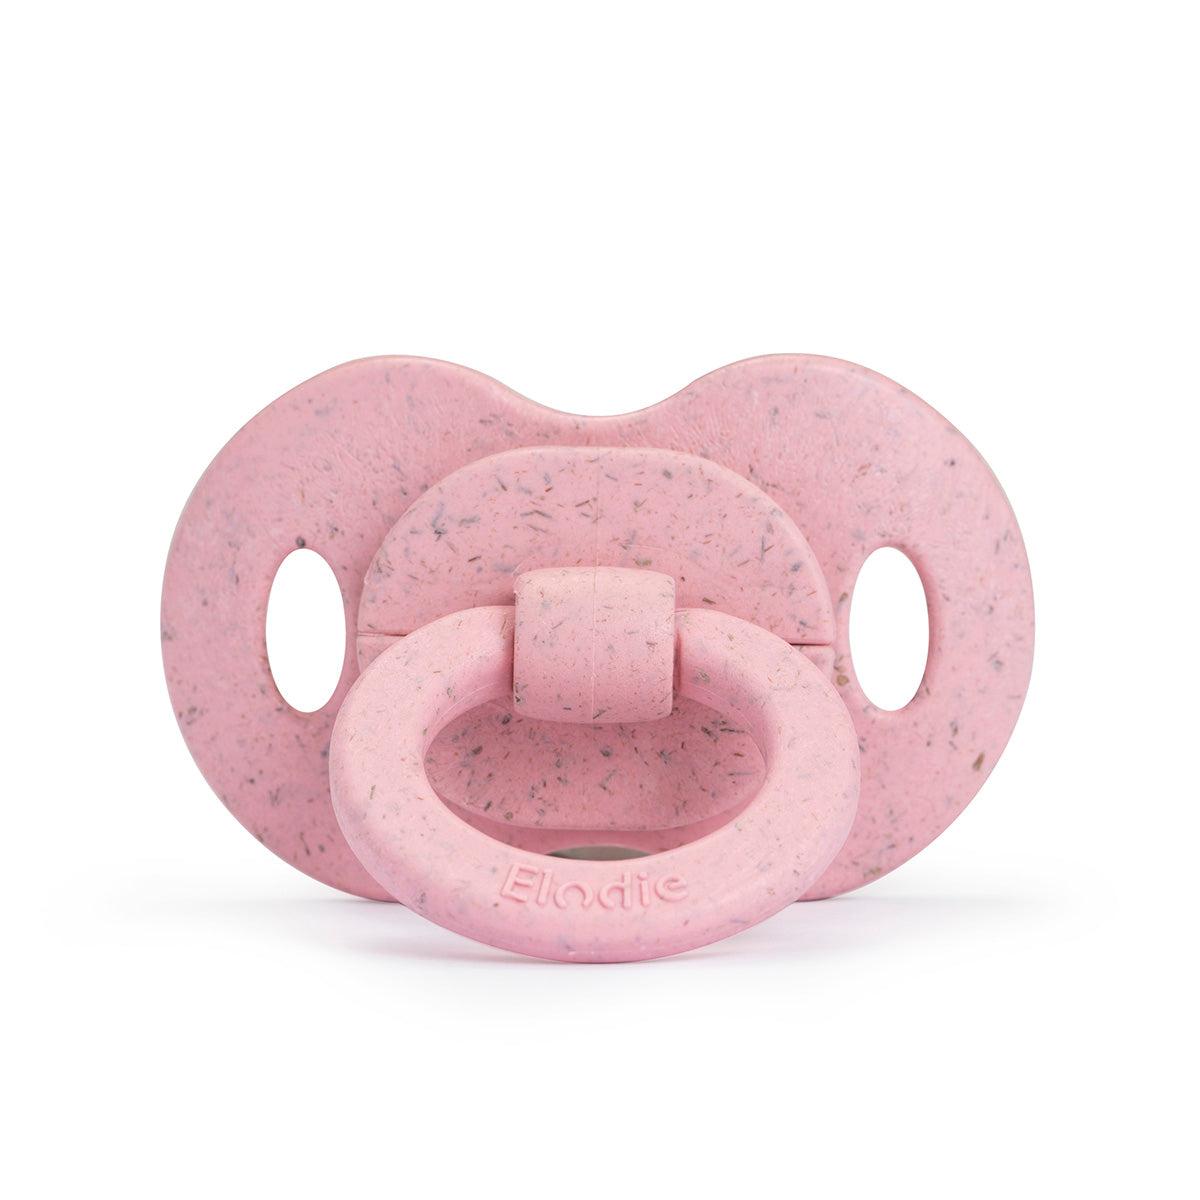 Elodie Details - Bamboo Pacifier Silicone - Candy Pink